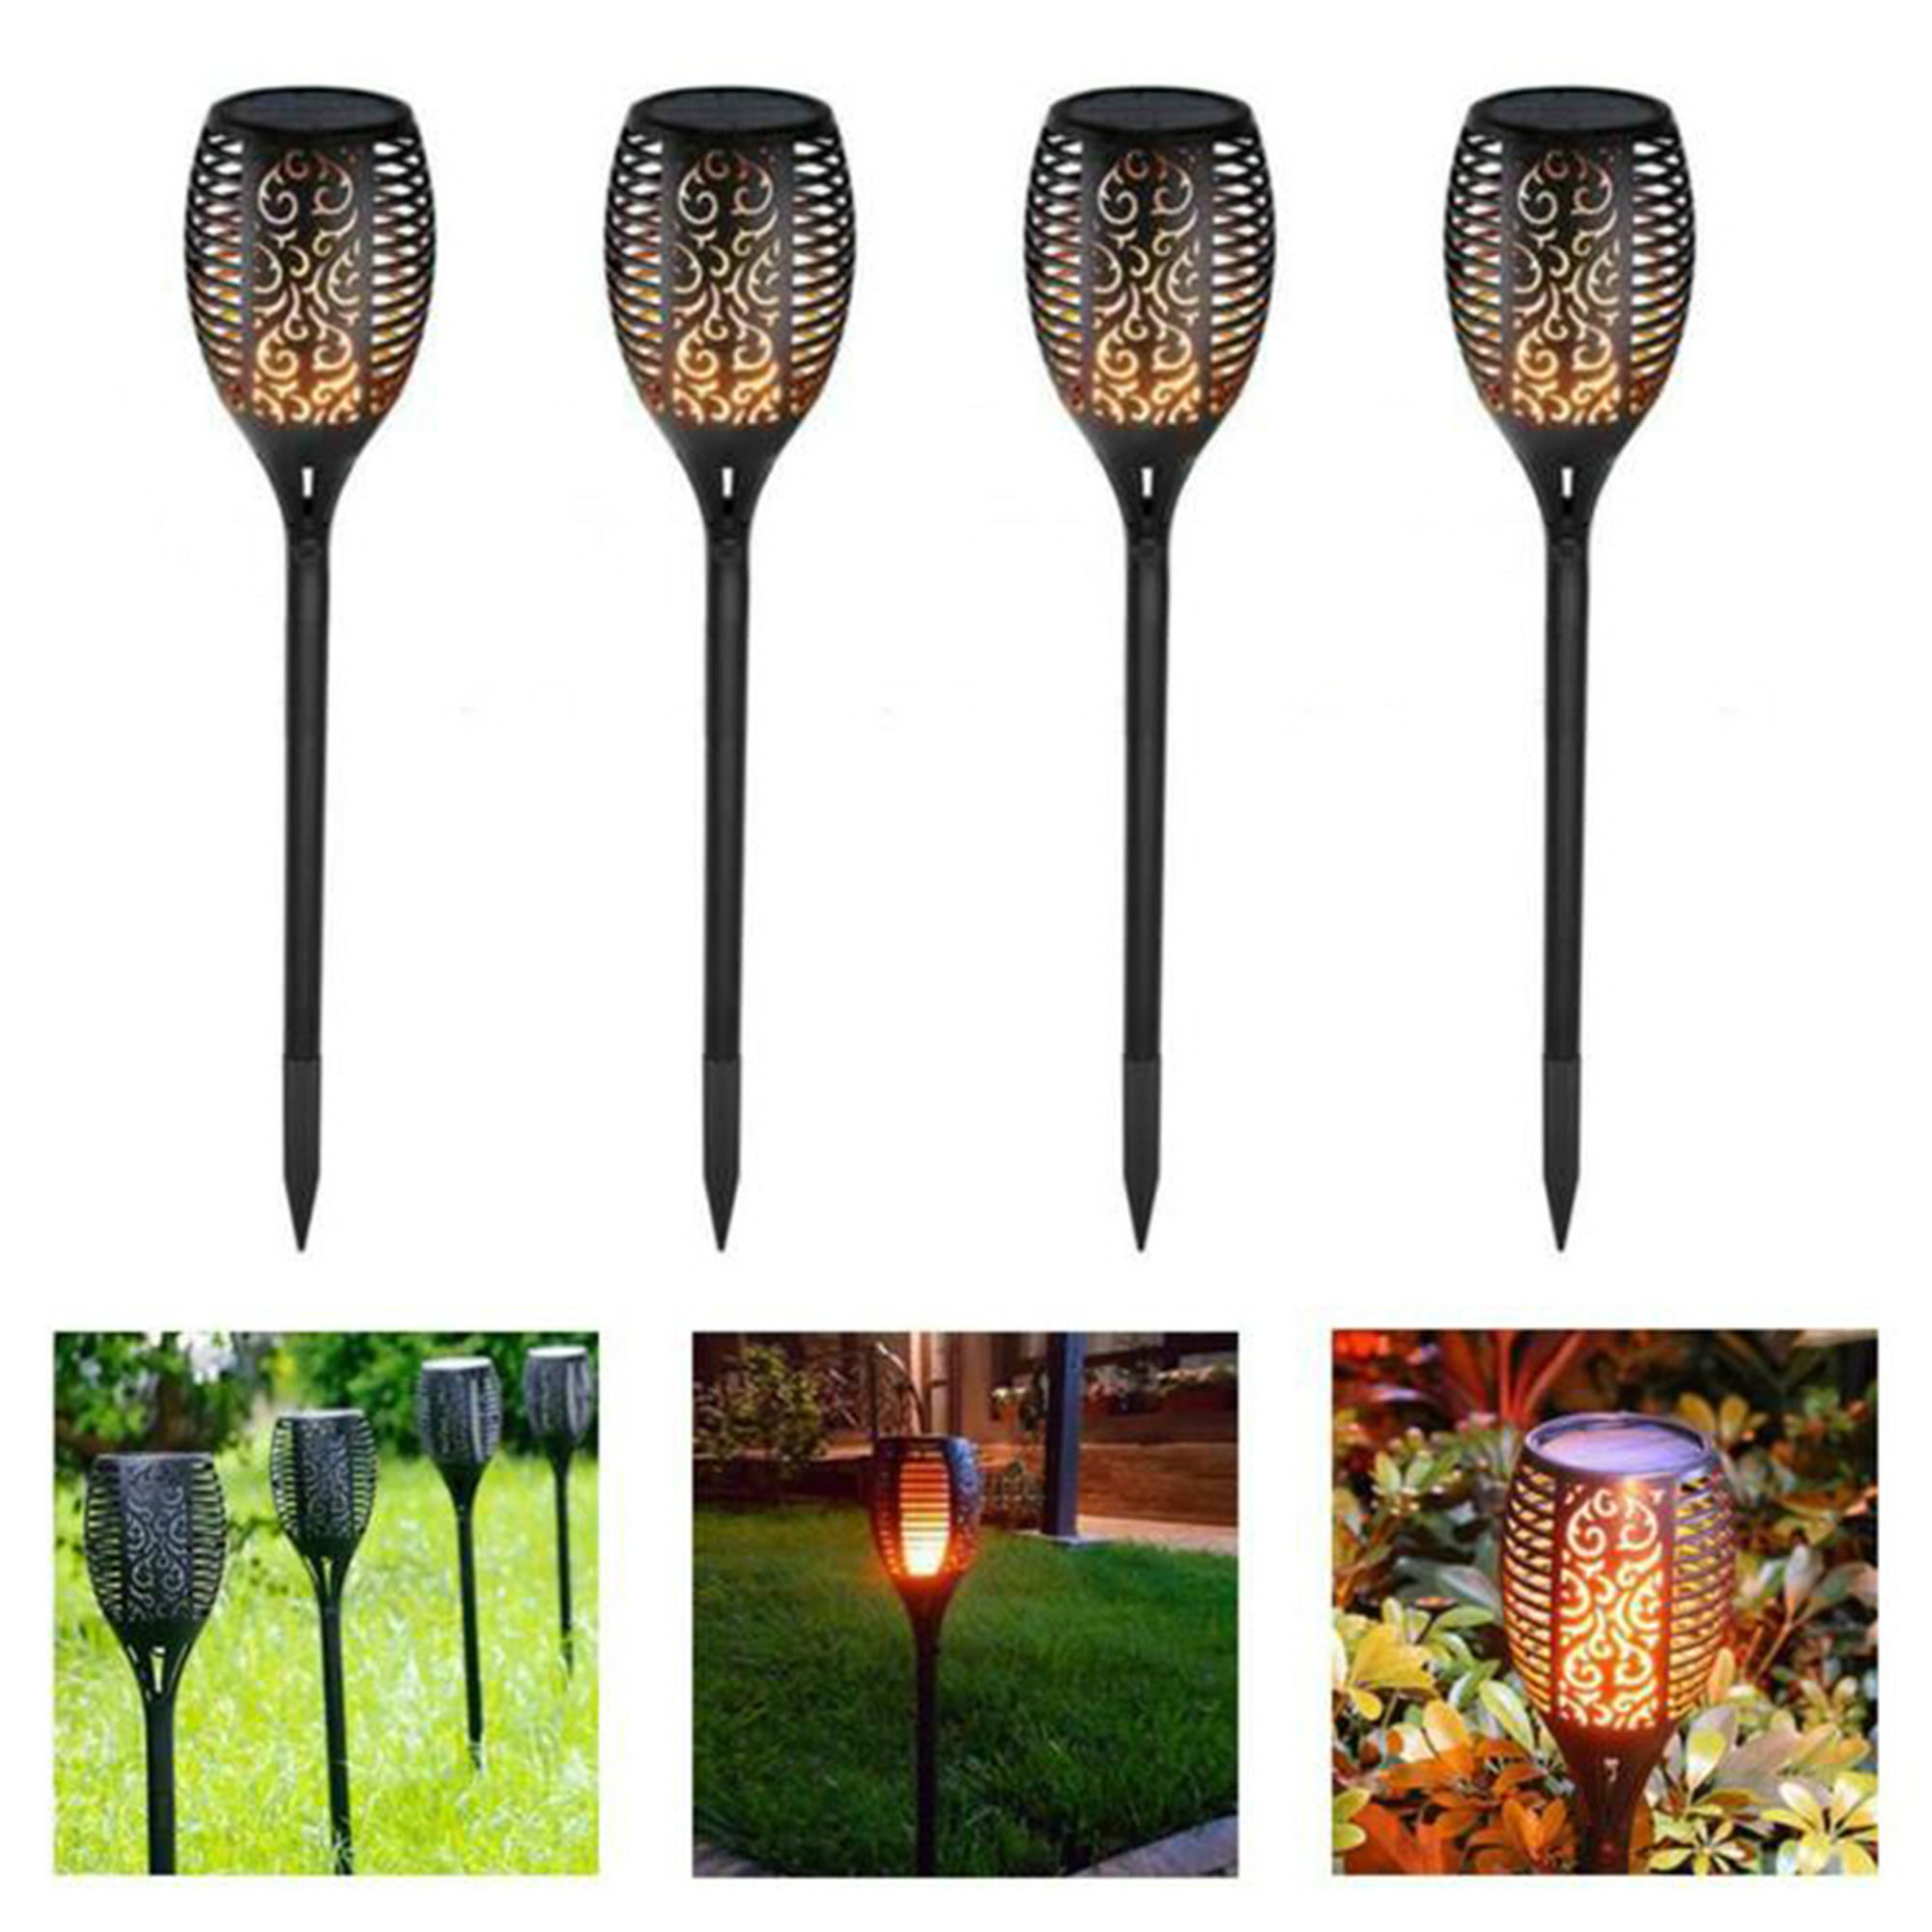 6pcs pack 12/33 LED Solar Flame Torch Light Flickering Waterproof Garden Lamps 